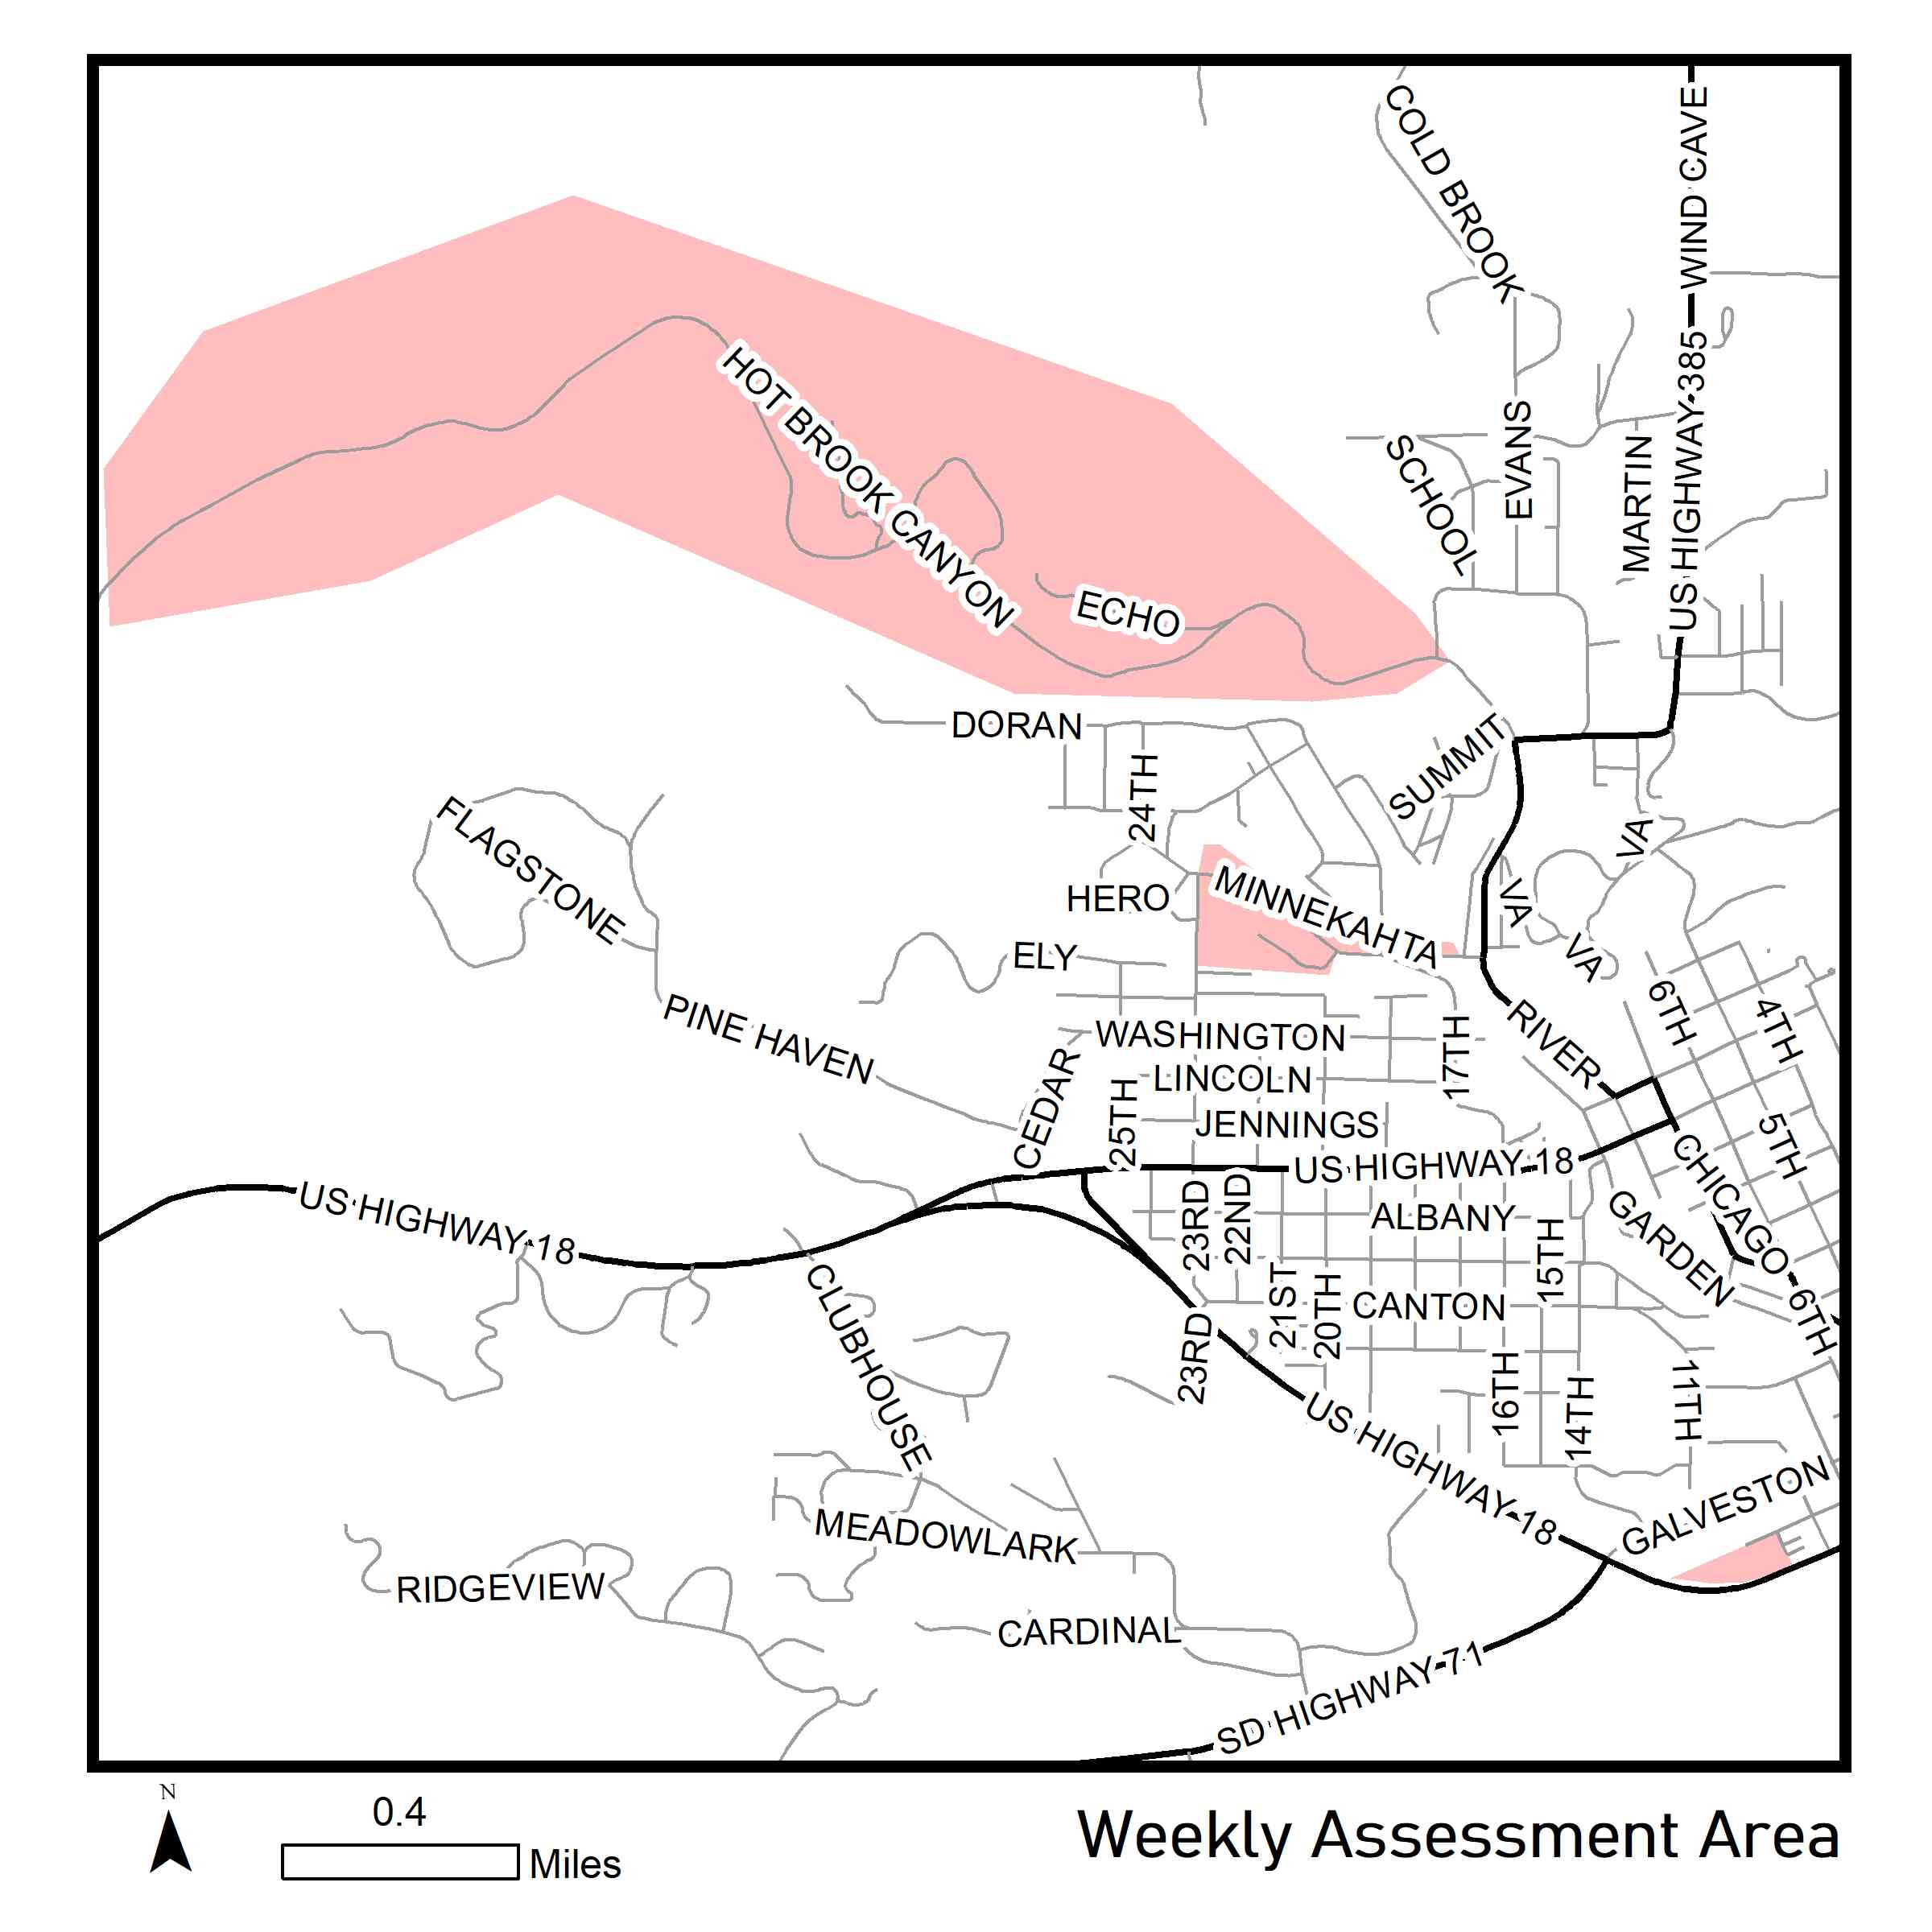 Map of reassessment area for week of July 13th 2020.